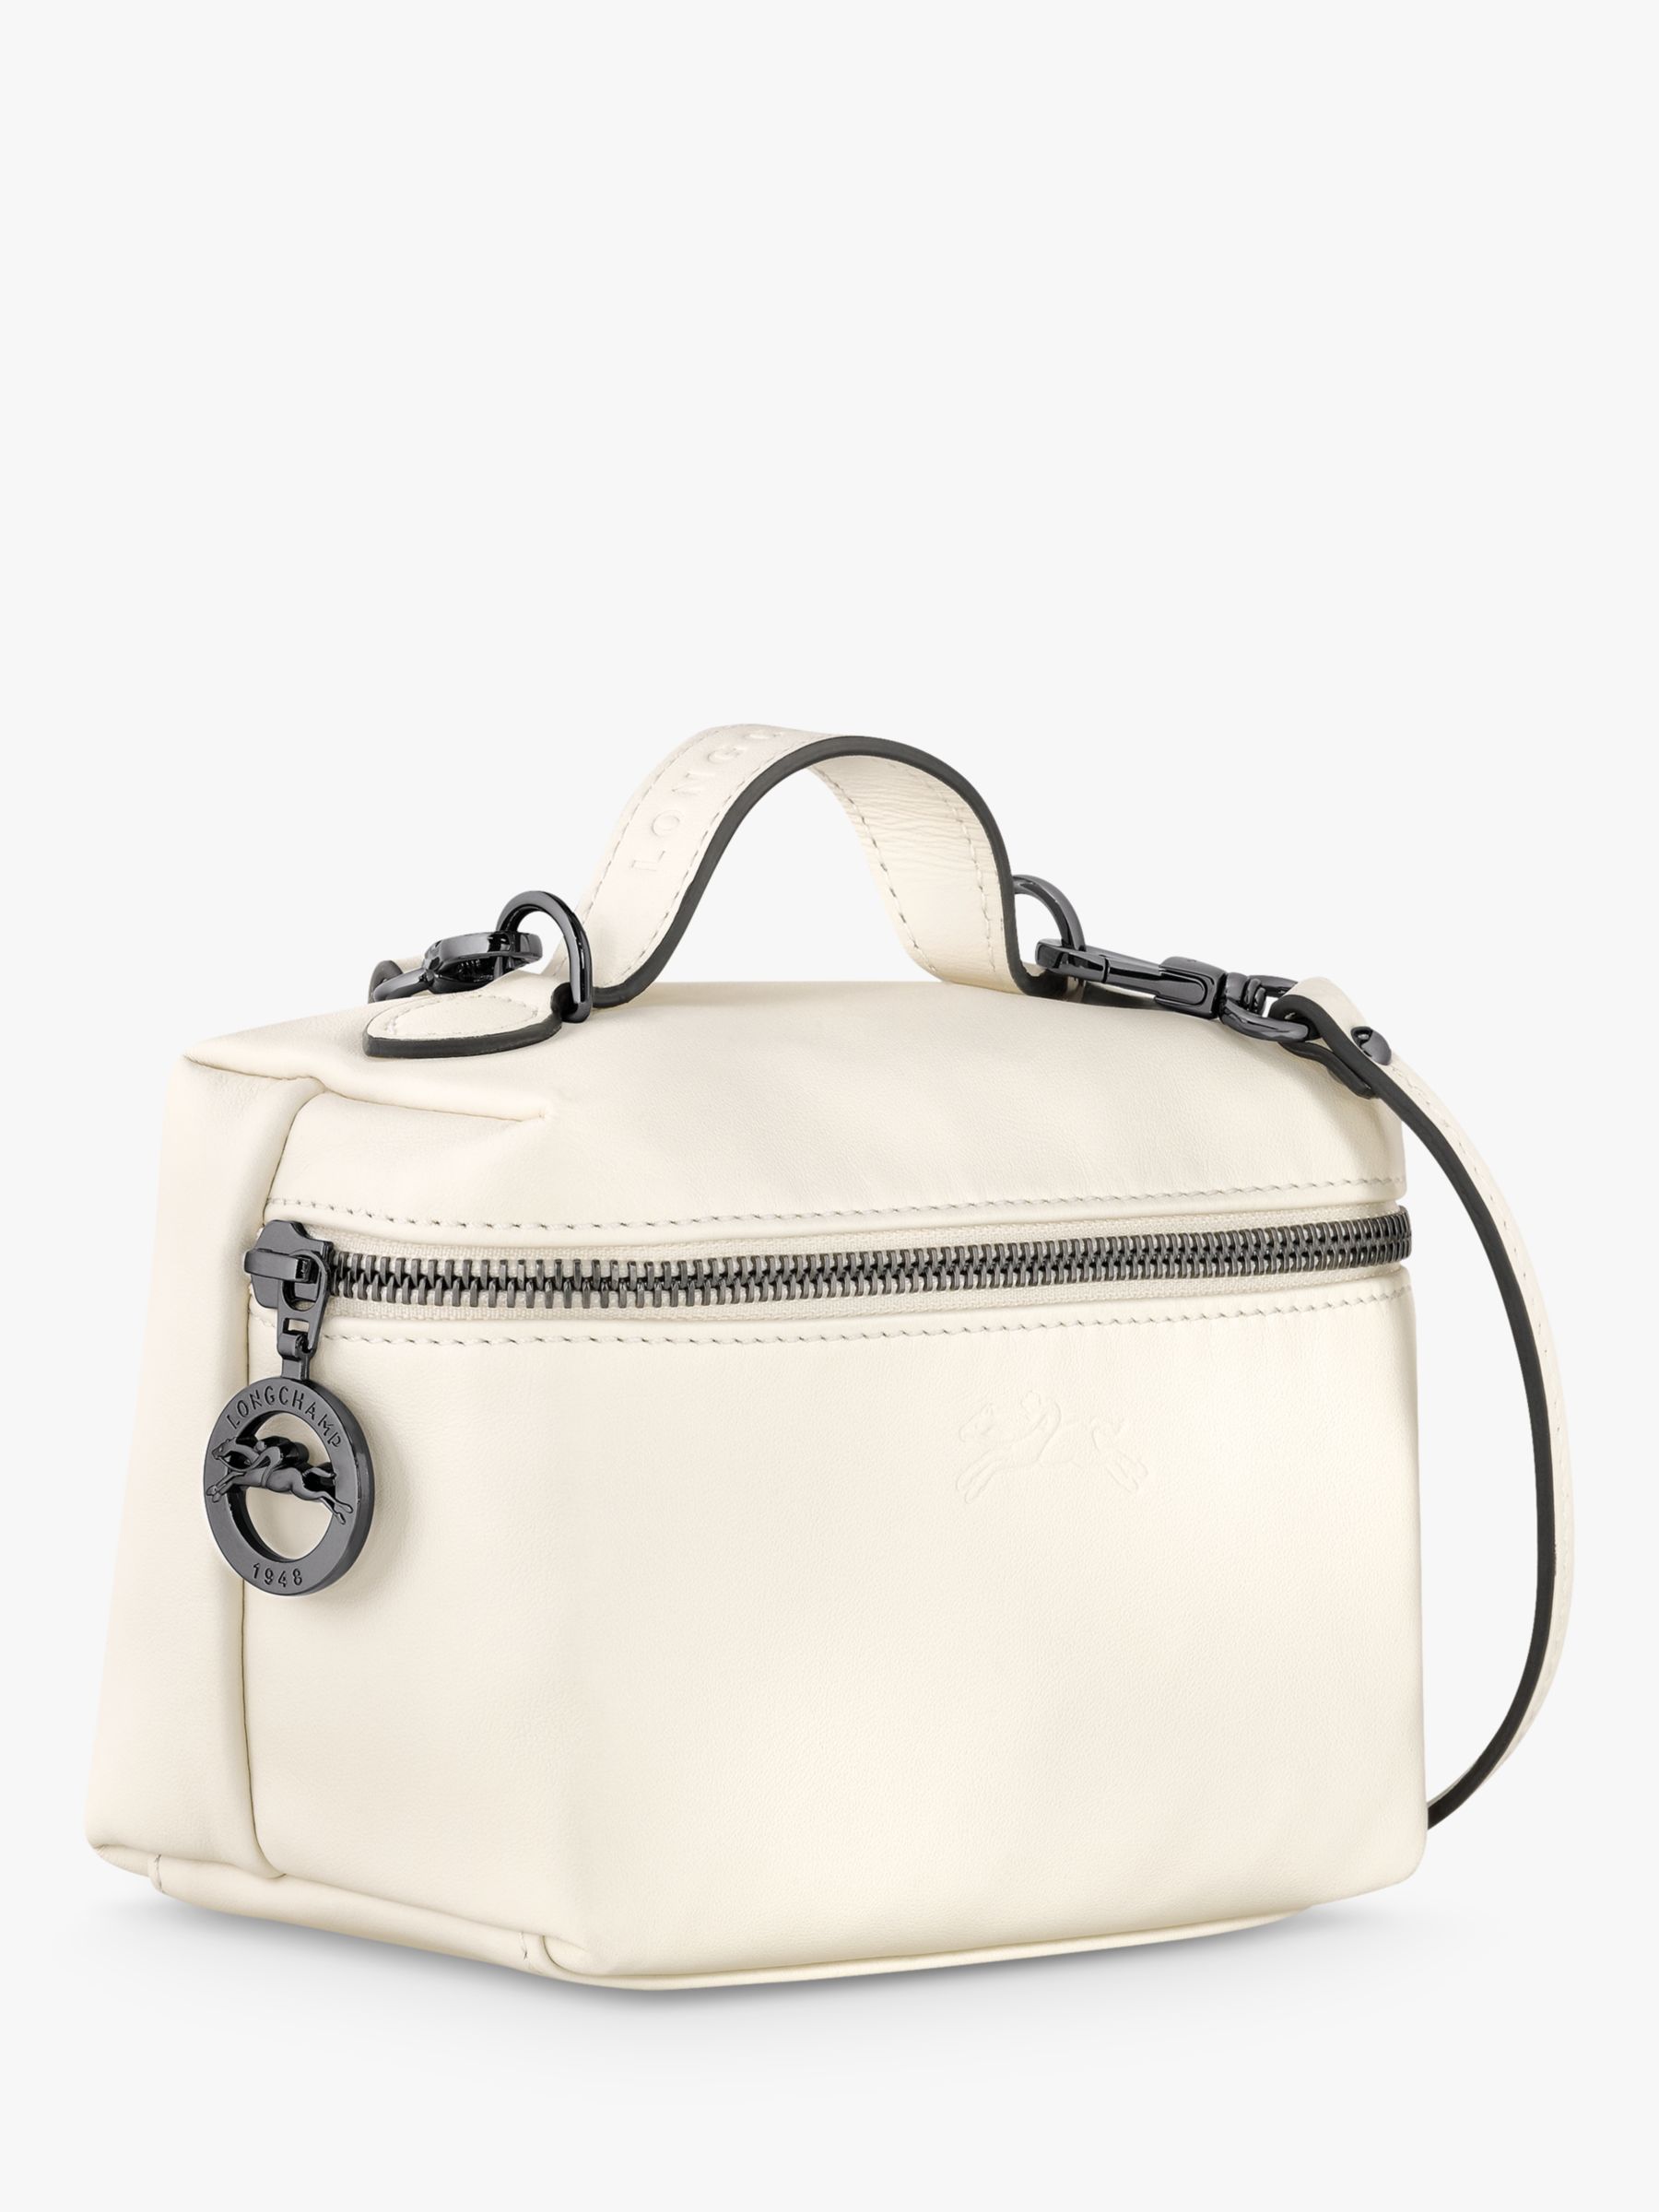 Buy Longchamp Le Pliage Xtra Extra Small Vanity Bag Online at johnlewis.com